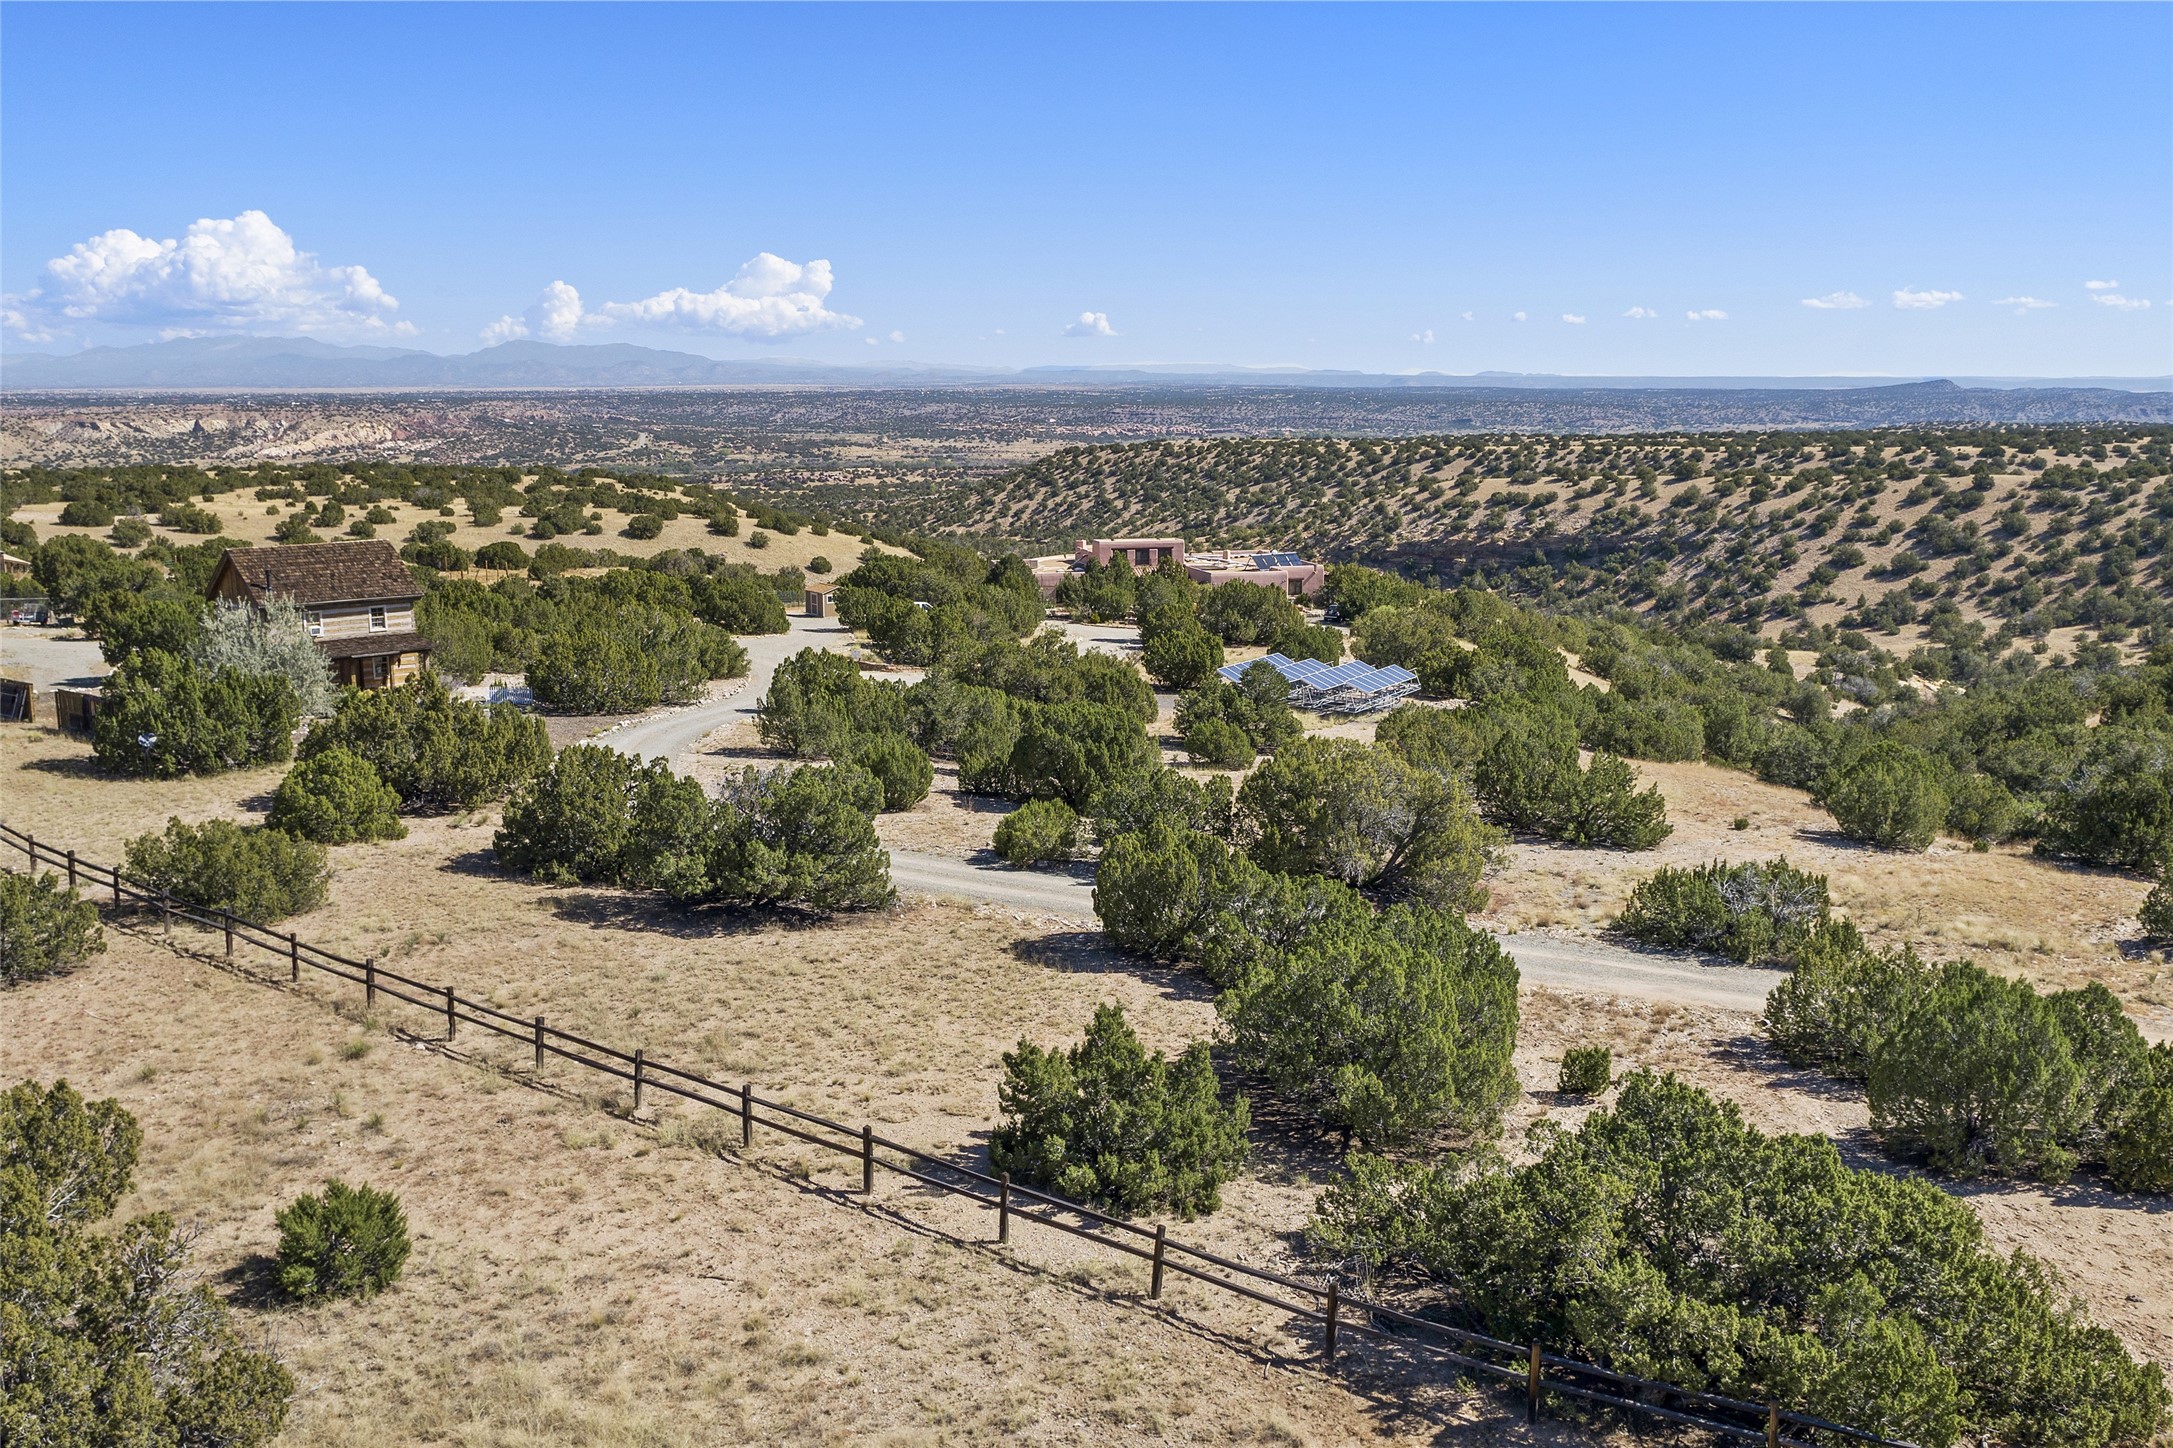 50 Gopeyka Canyon Road, Cerrillos, New Mexico 87010, 4 Bedrooms Bedrooms, ,3 BathroomsBathrooms,Residential,For Sale,50 Gopeyka Canyon Road,202401306